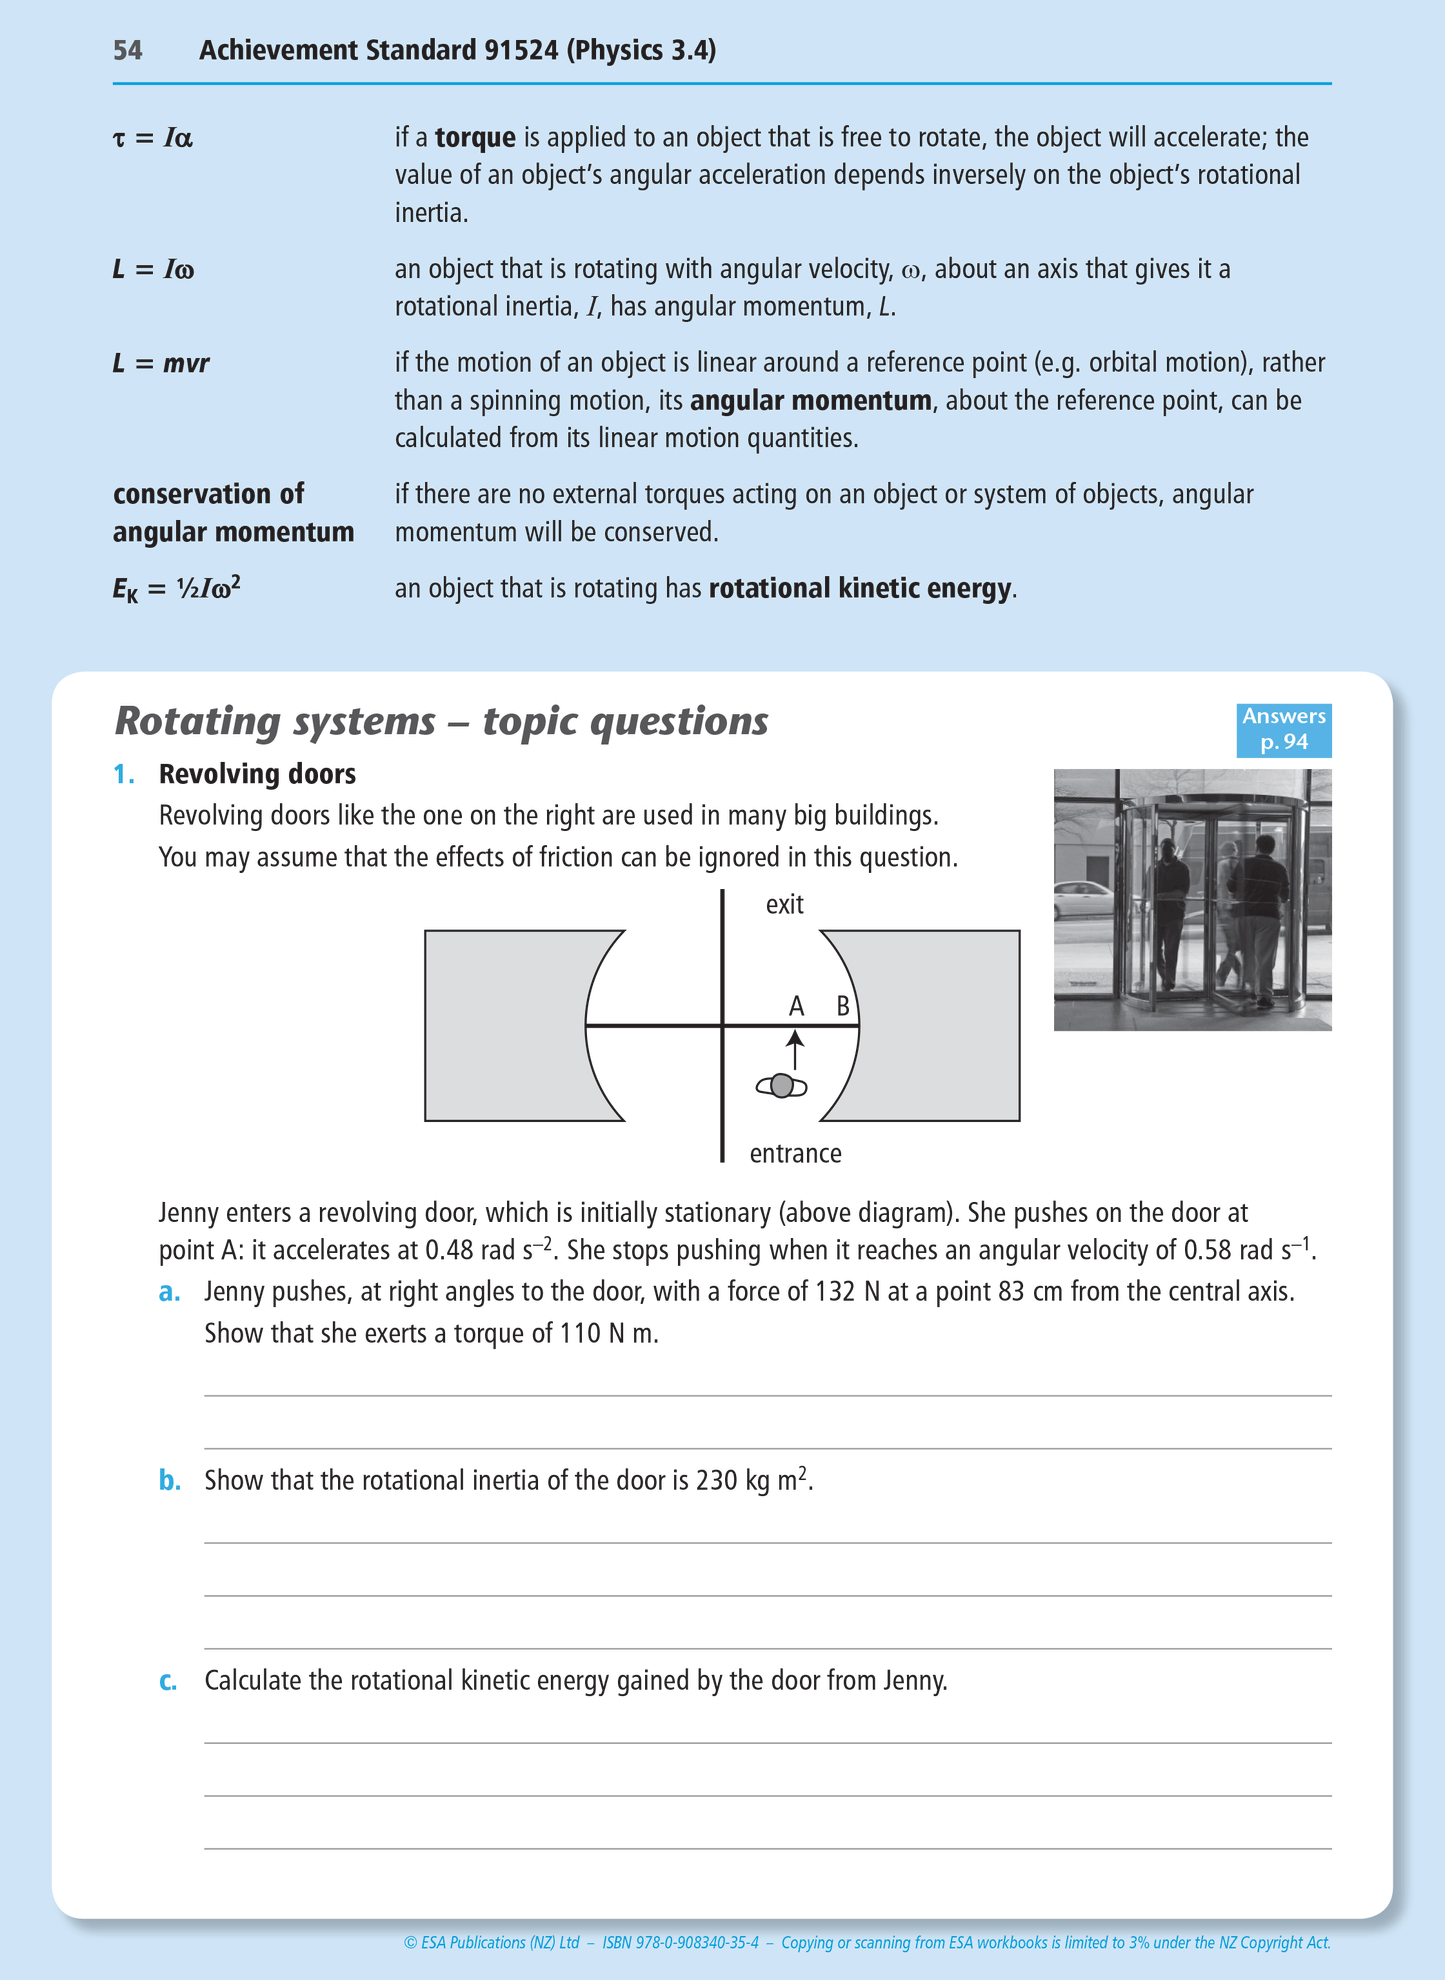 Level 3 Mechanical Systems 3.4 Learning Workbook